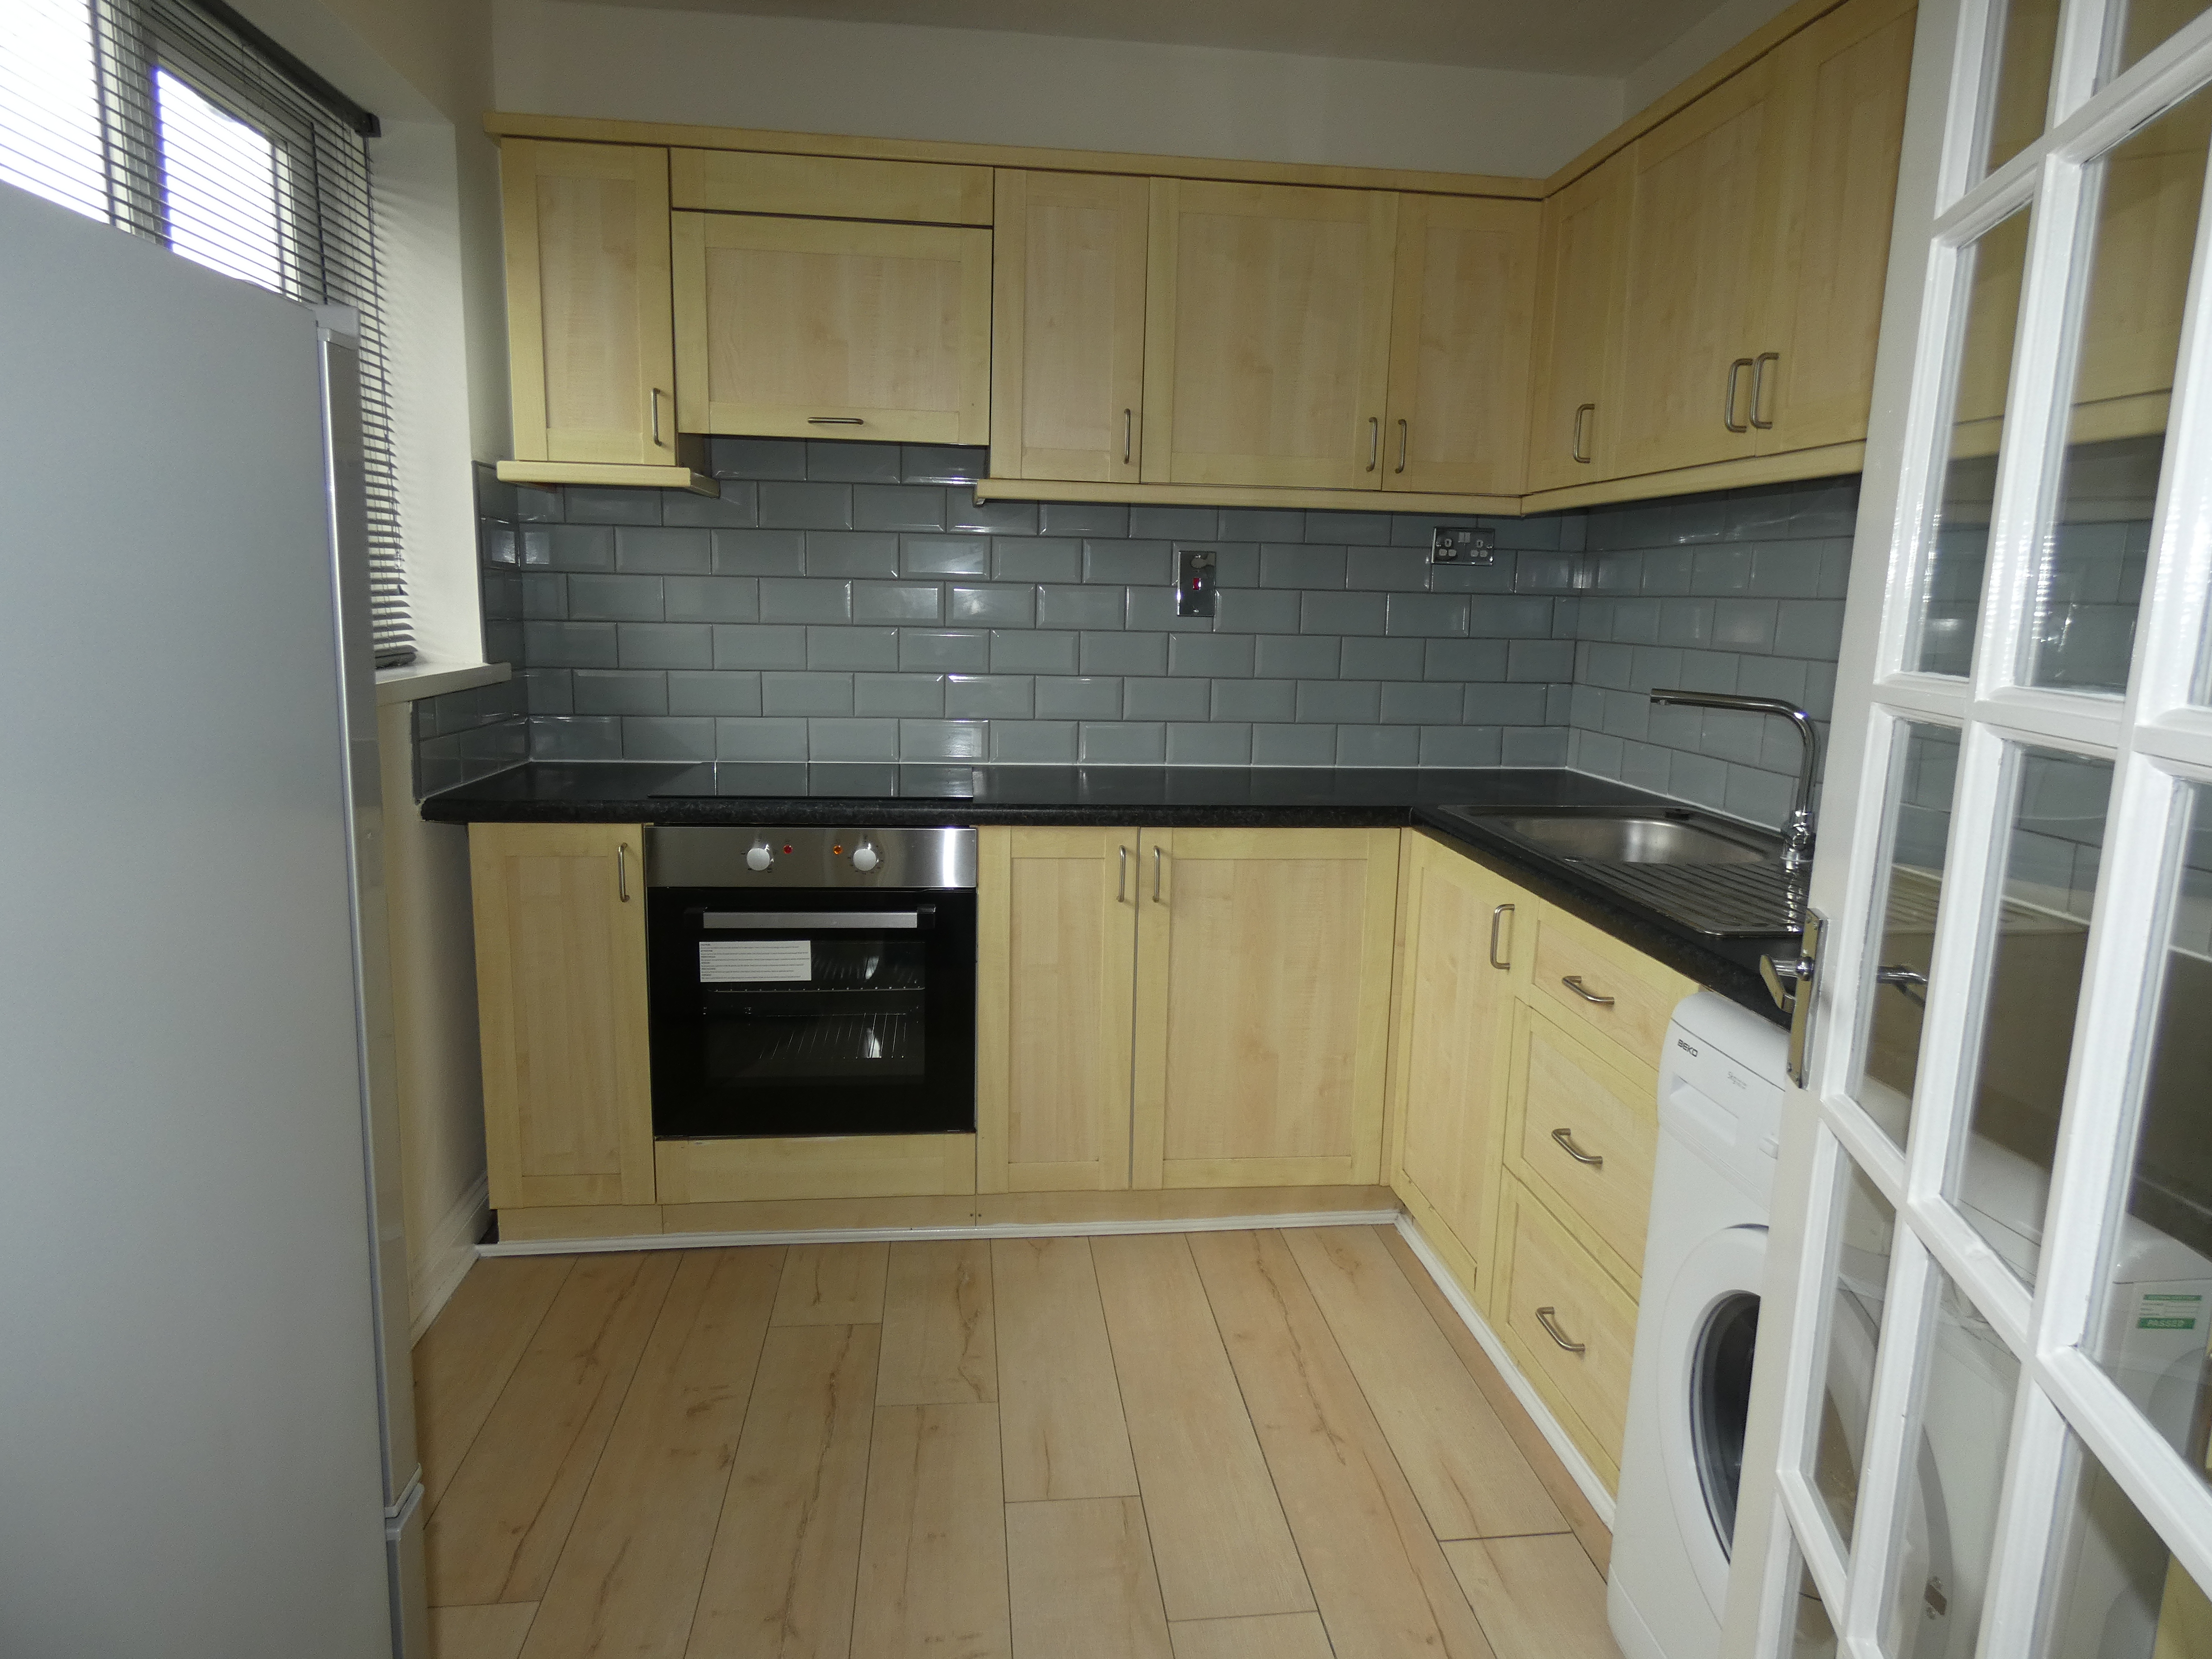 2 bed flat to rent in Wooler Green, Newcastle upon tyne  - Property Image 2